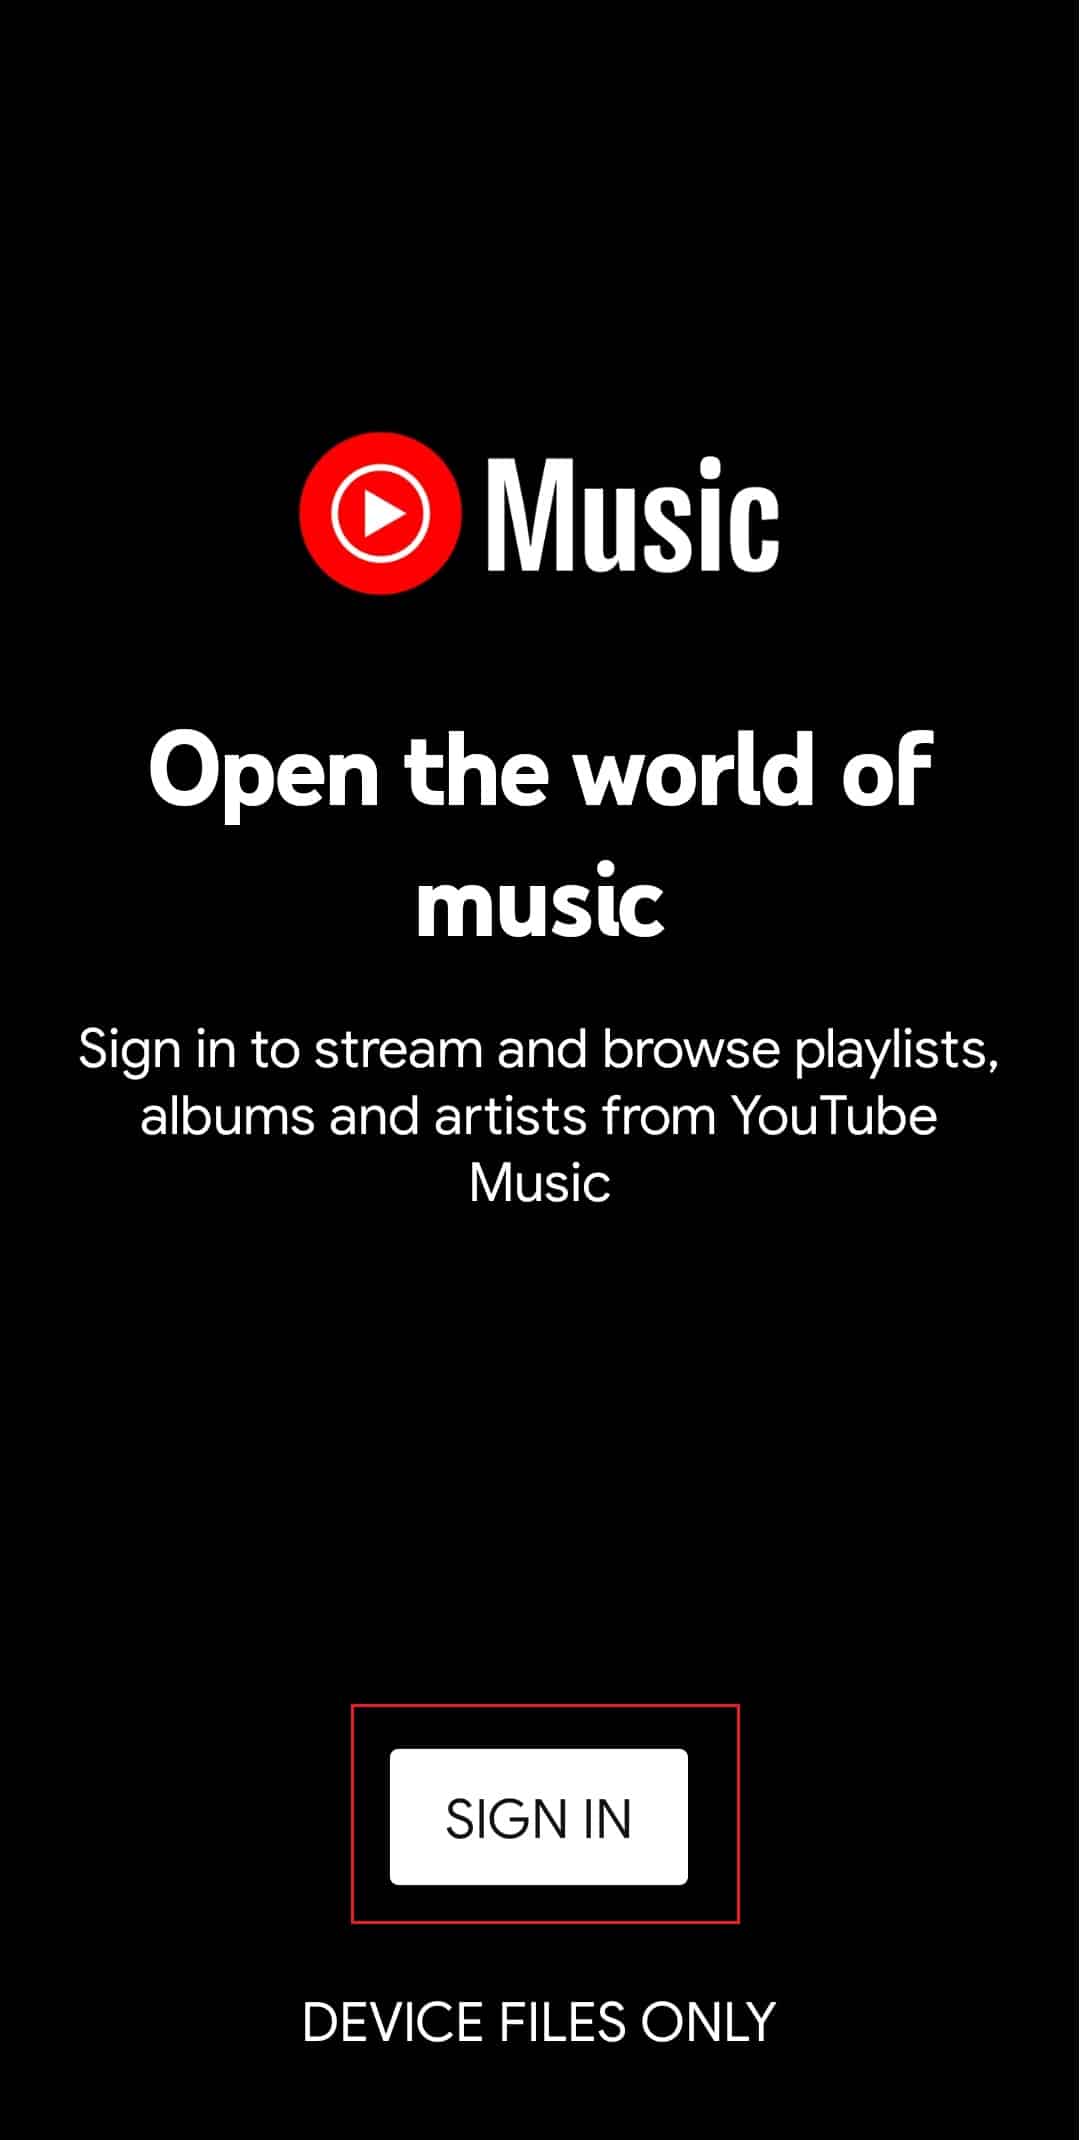 Sign in to YouTube Music app